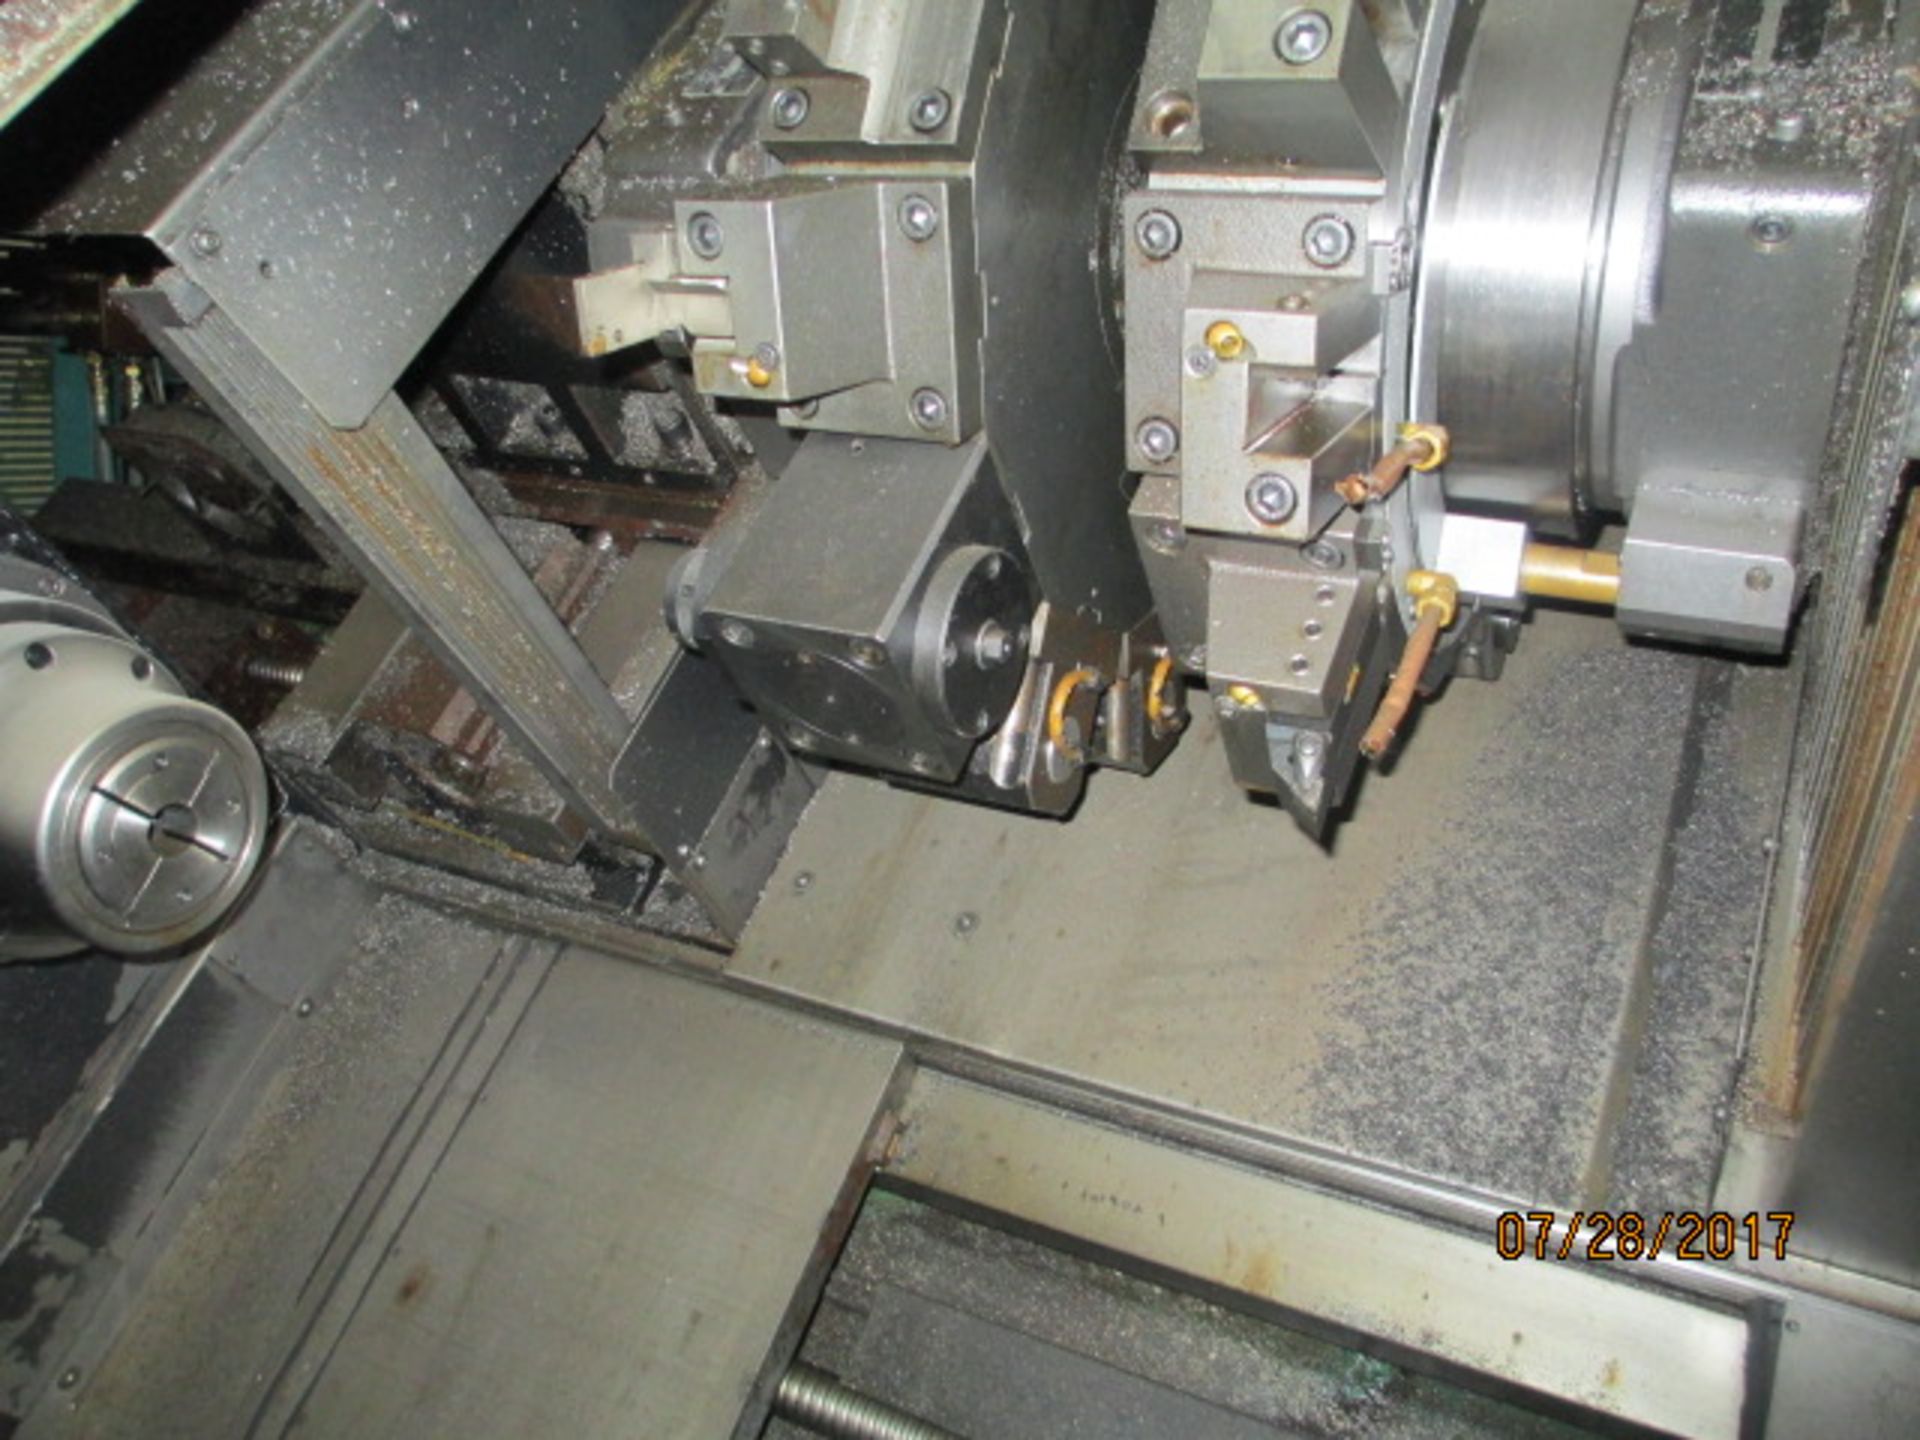 Nakamura Tome Model TW-30 2-Axis Twin Spindle Turning Center - Dryden, MI - Image 2 of 3